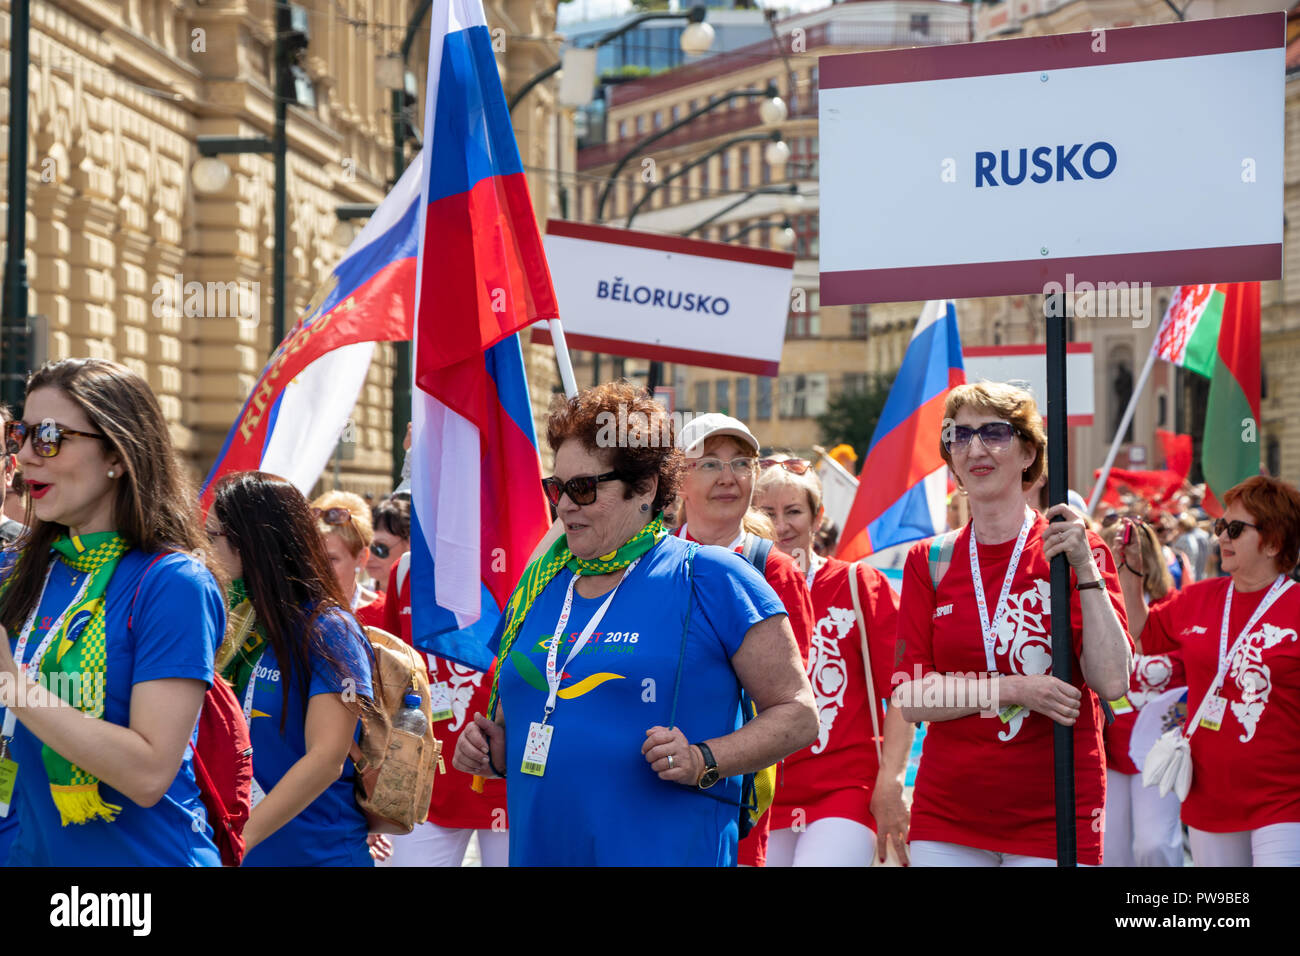 PRAGUE, CZECH REPUBLIC - JULY 1, 2018: Russian visitors parading at Sokolsky Slet, a once-every-six-years gathering of the Sokol movement - a Czech sp Stock Photo